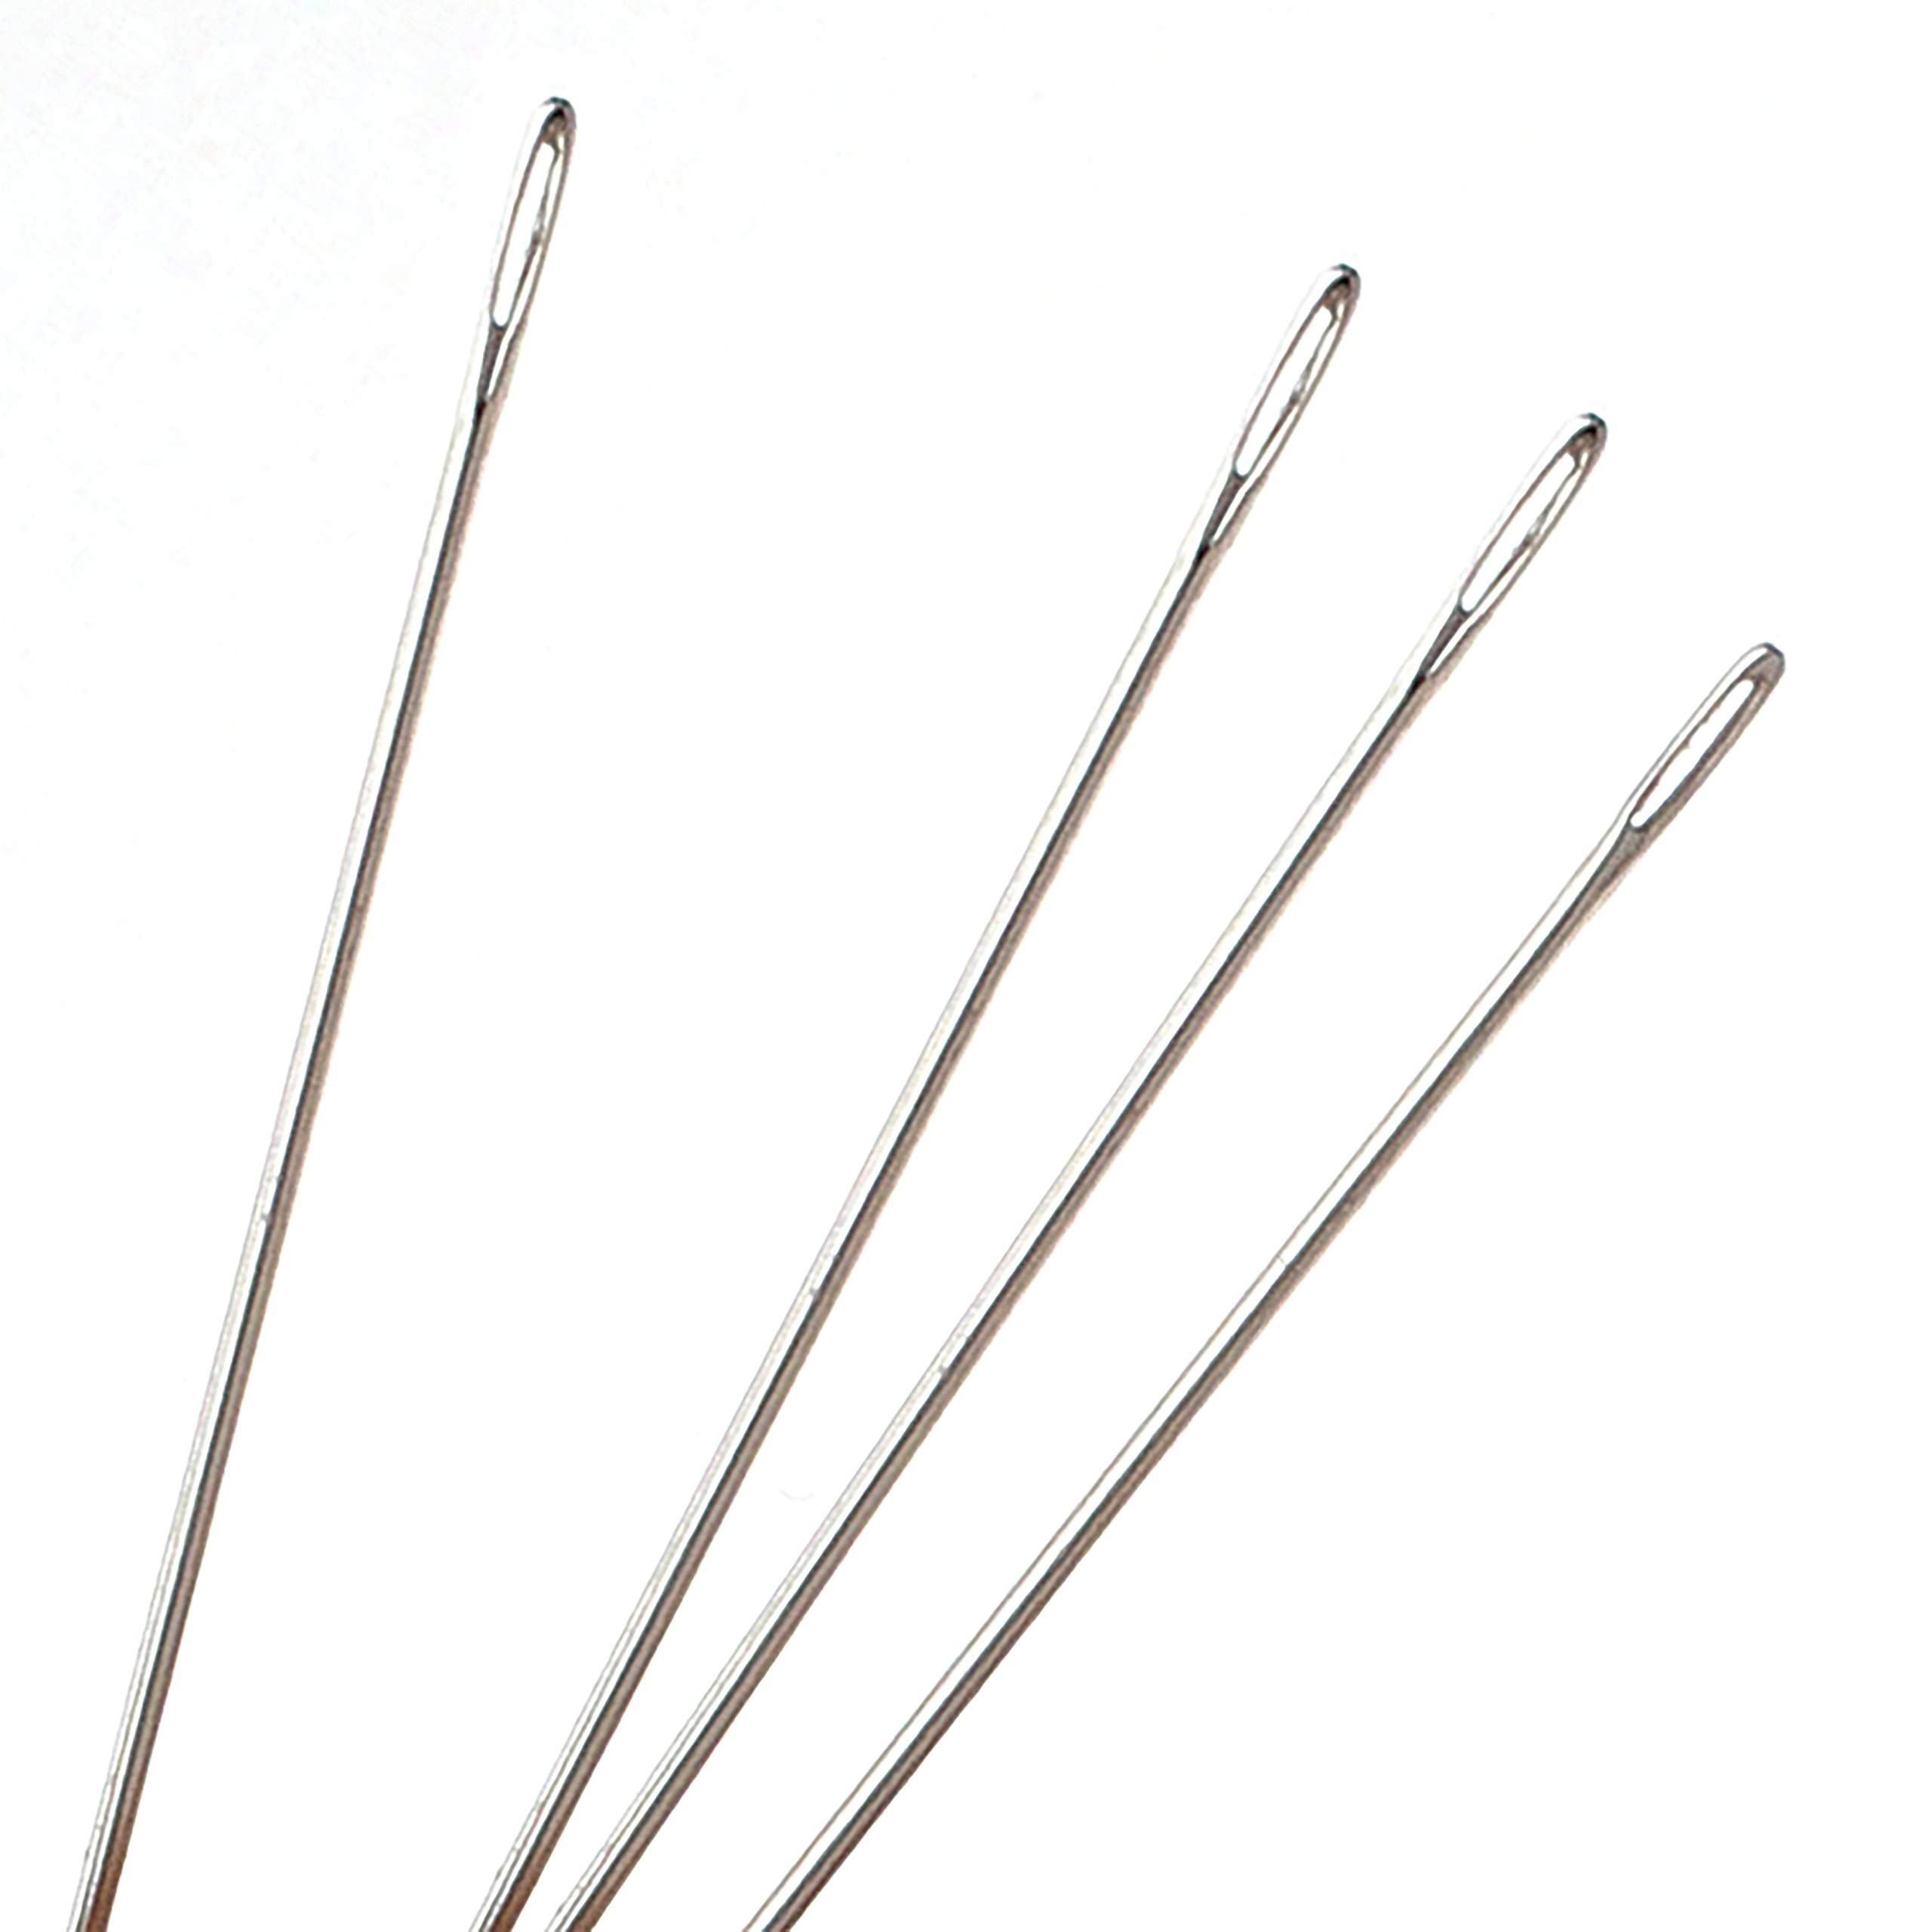 Pony Beading Needles, Size 12, Pack of 6, 4.5 Inches, Made in